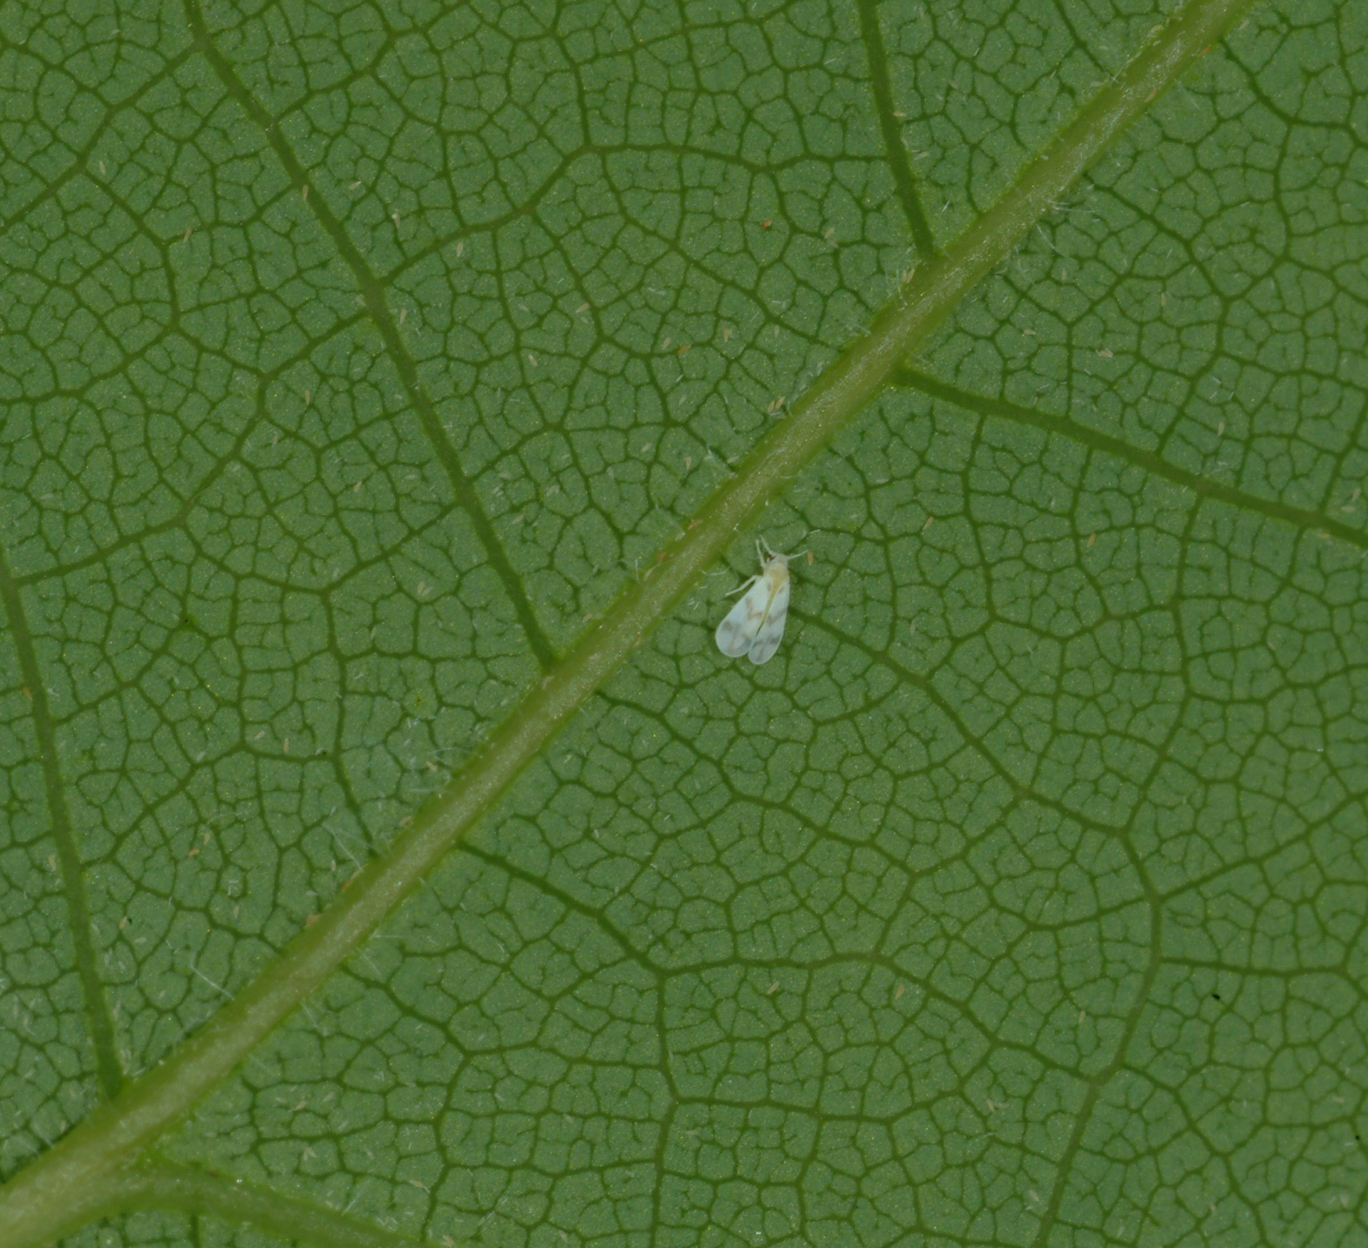 Banded wing whitefly.